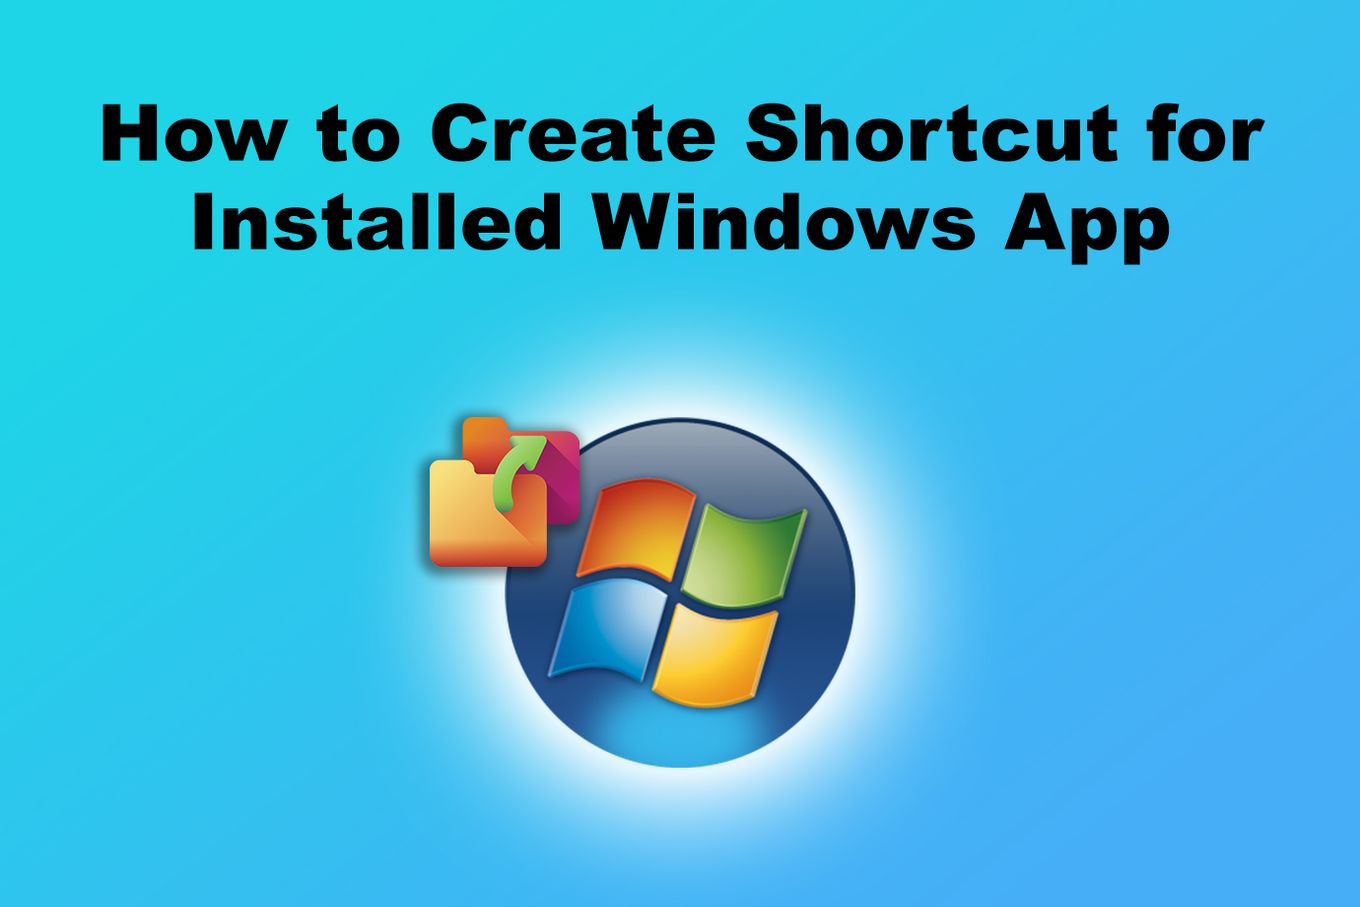 How to Create Shortcut for Installed Windows App